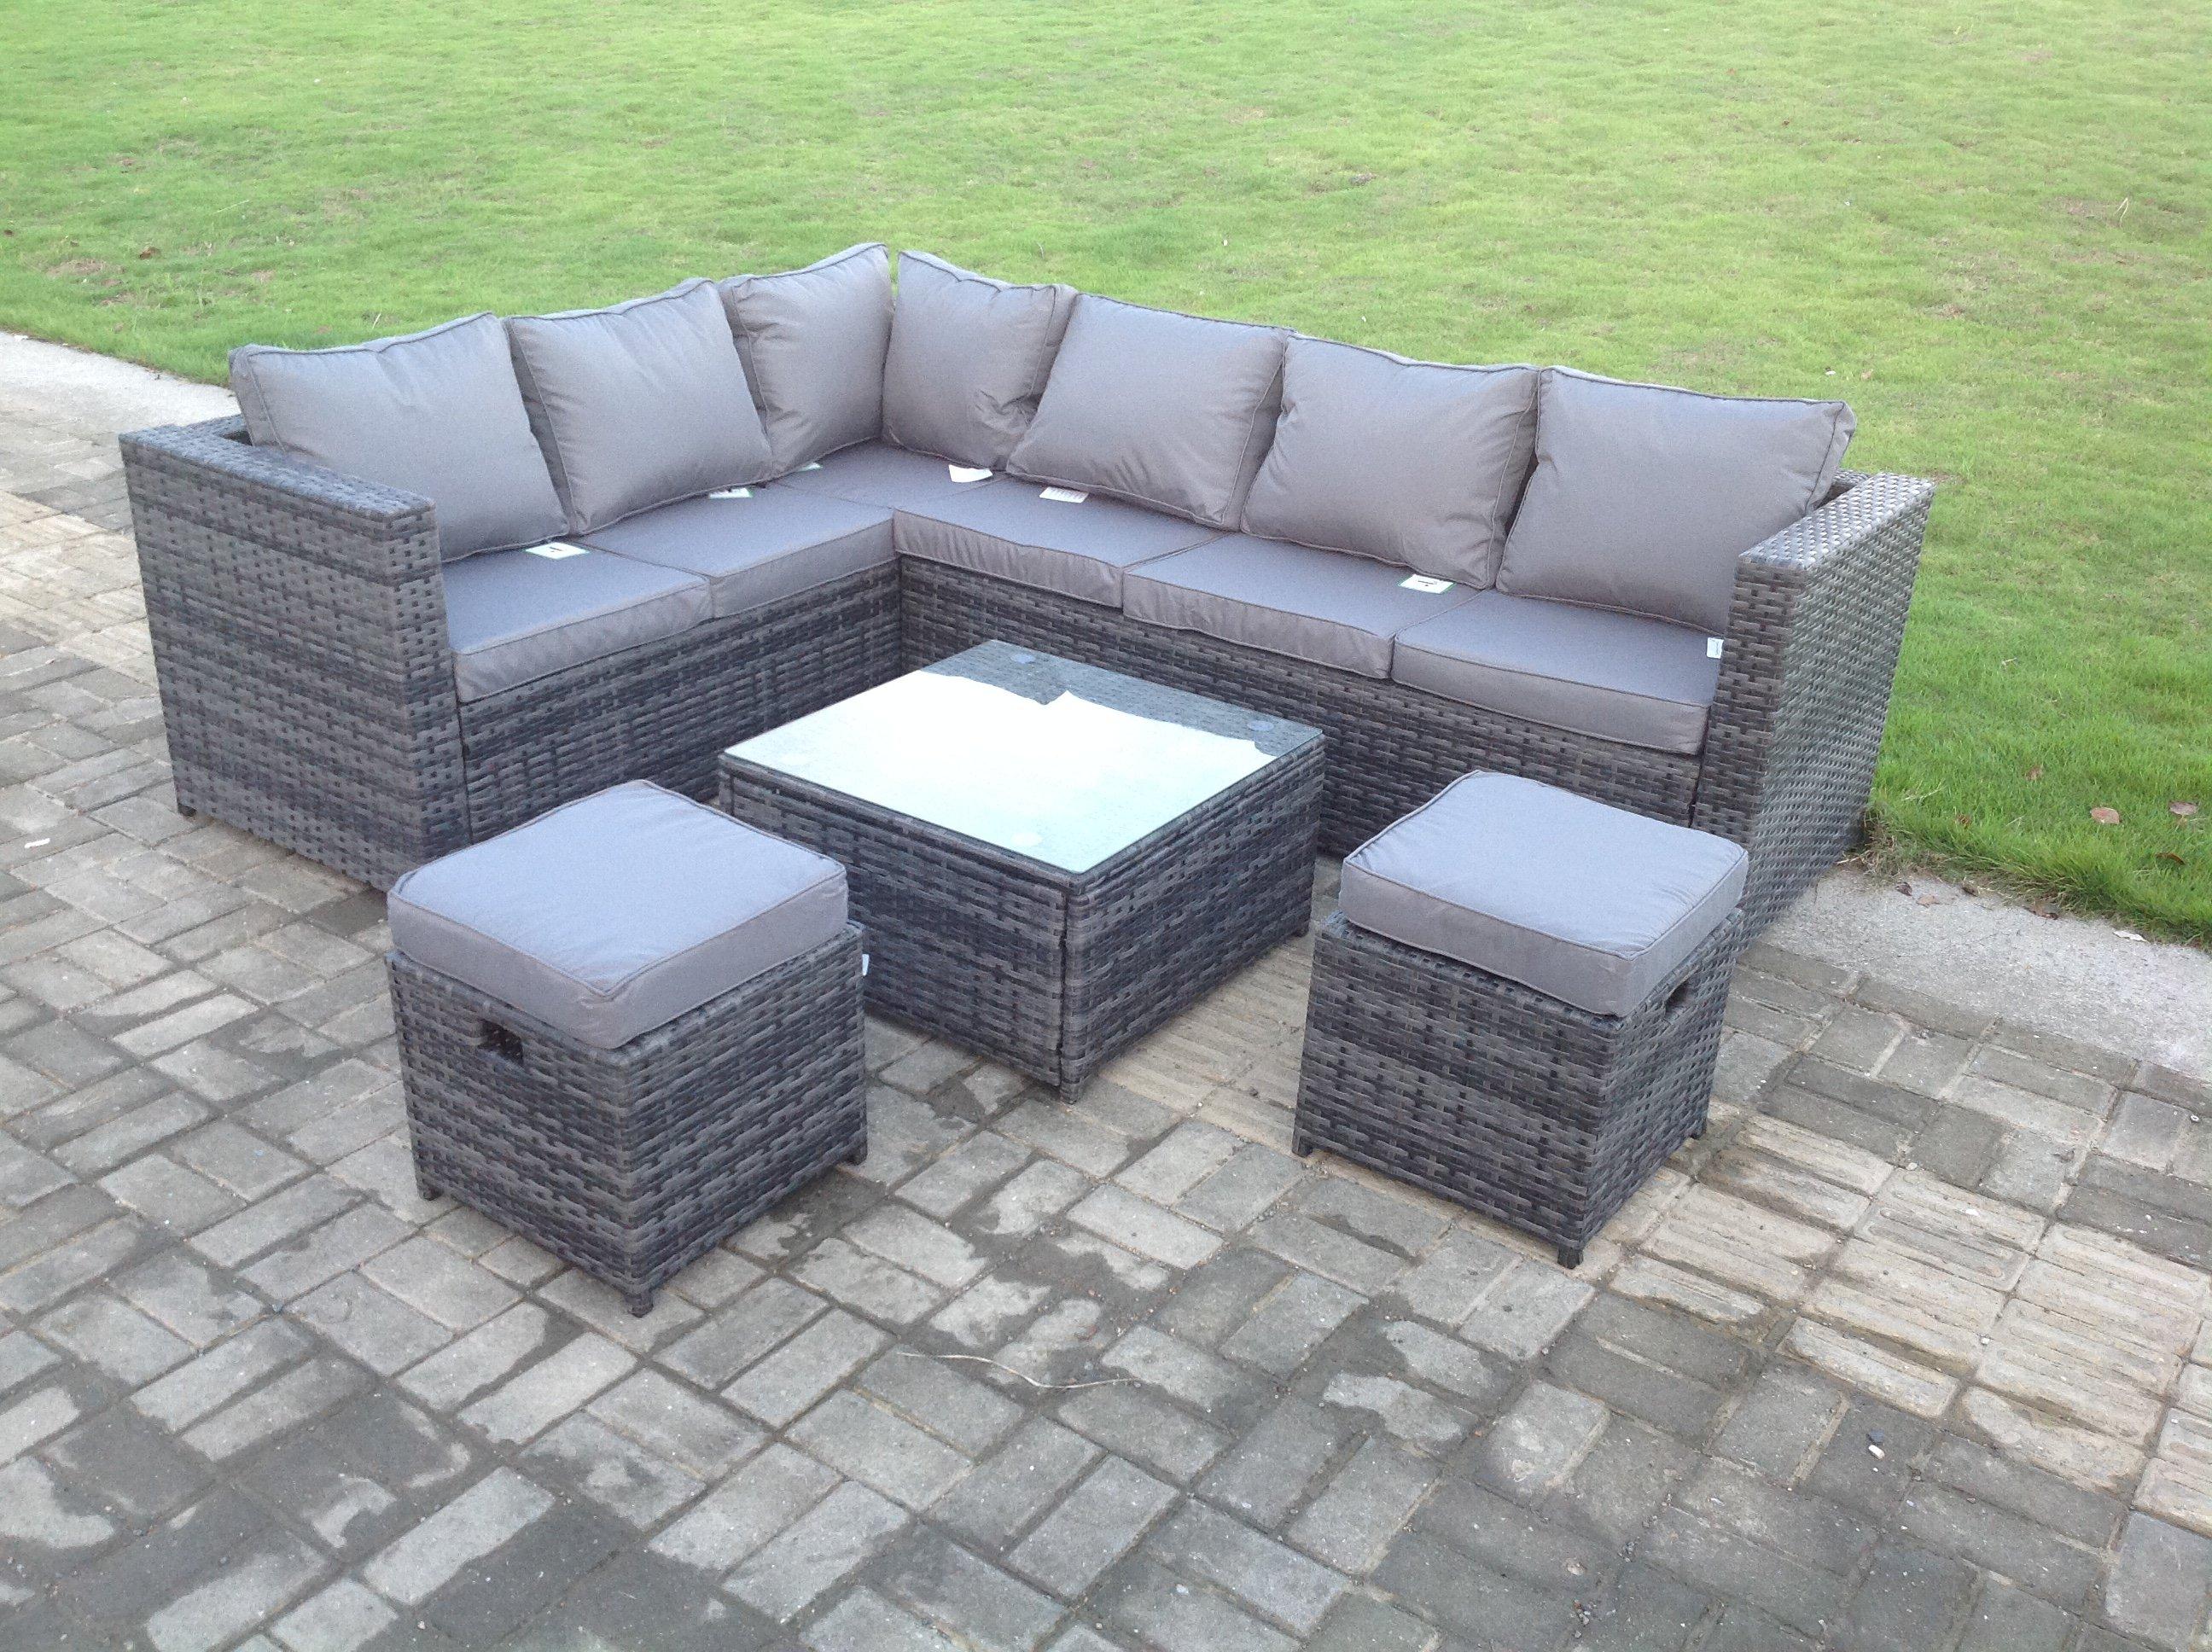 8 Seater Rattan Corner Sofa Set With Square Coffee Table Footstools